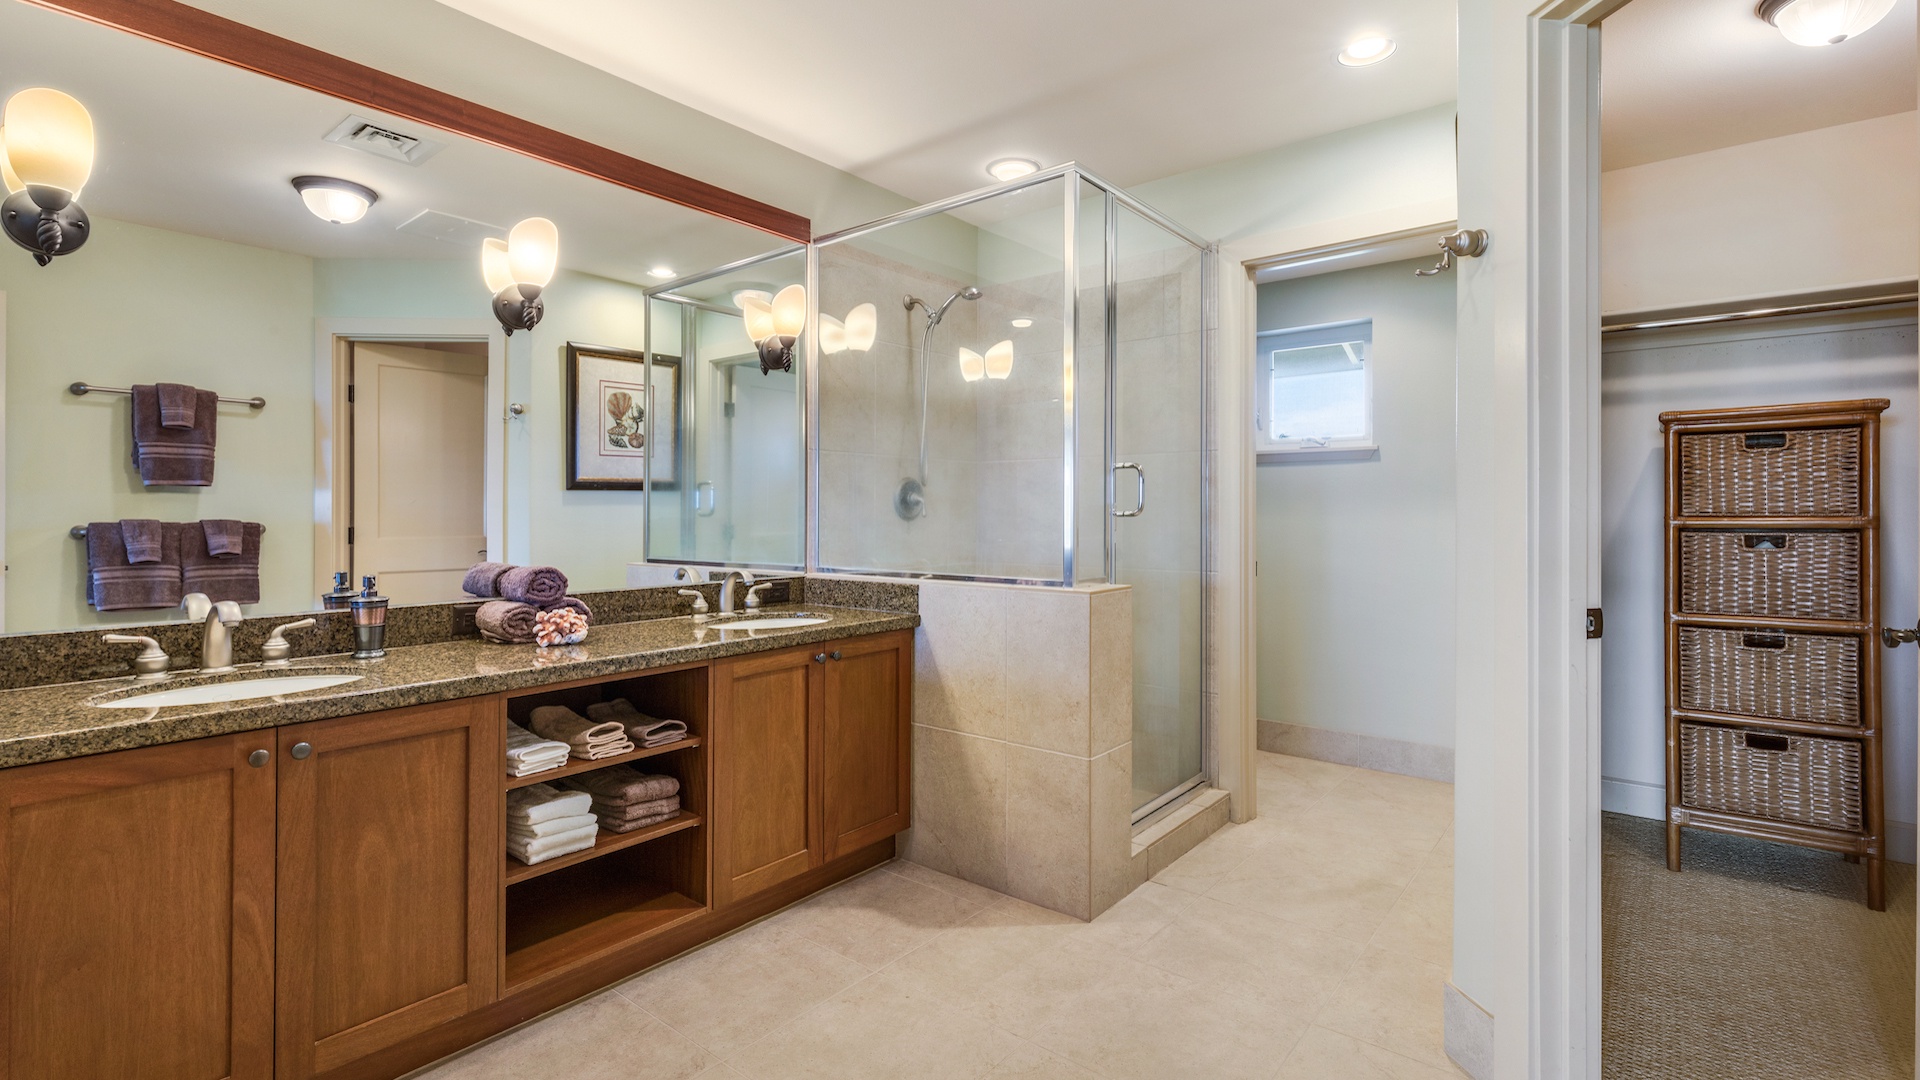 Waikoloa Vacation Rentals, 3BD Hali'i Kai (12G) at Waikoloa Resort - Primary bath w/ walk-in shower and dual sinks, separate toilet room and walk-in closet.